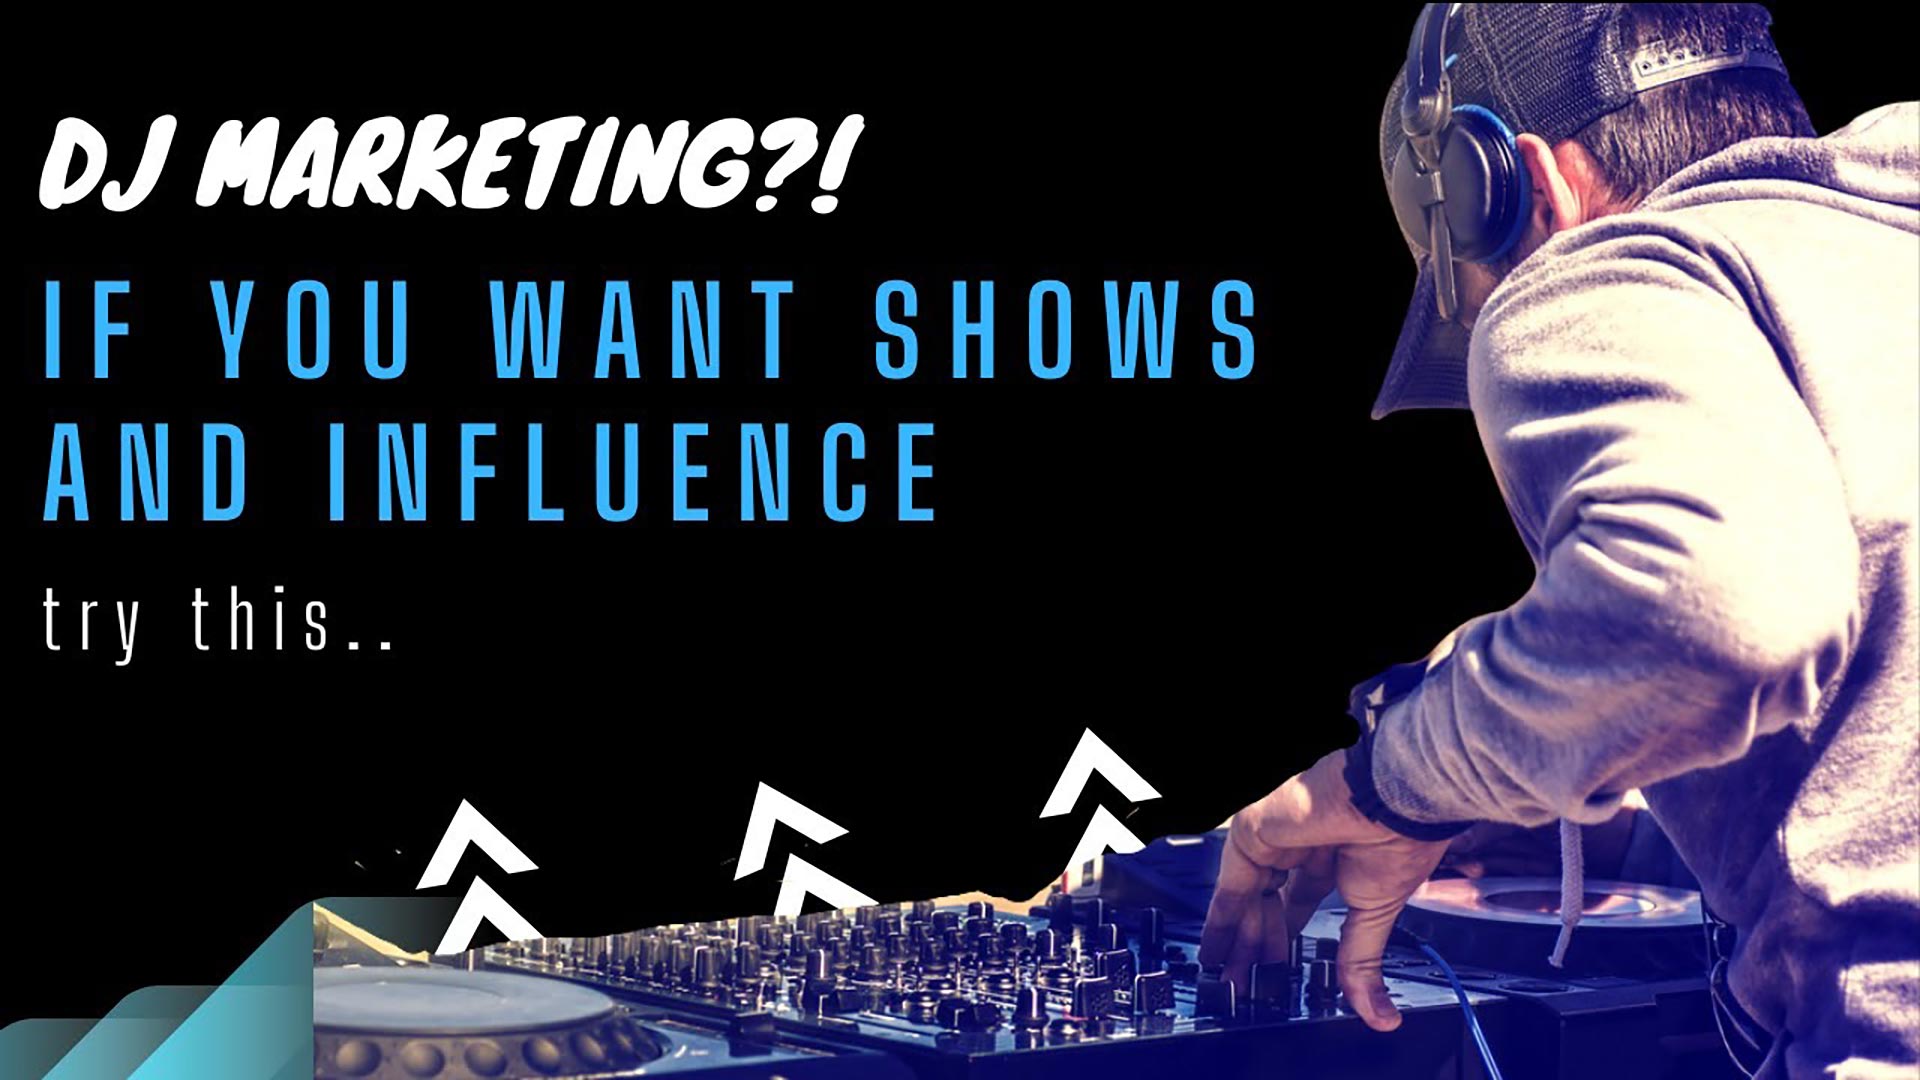 DJ Marketing! Want Shows and Influence? Try this..